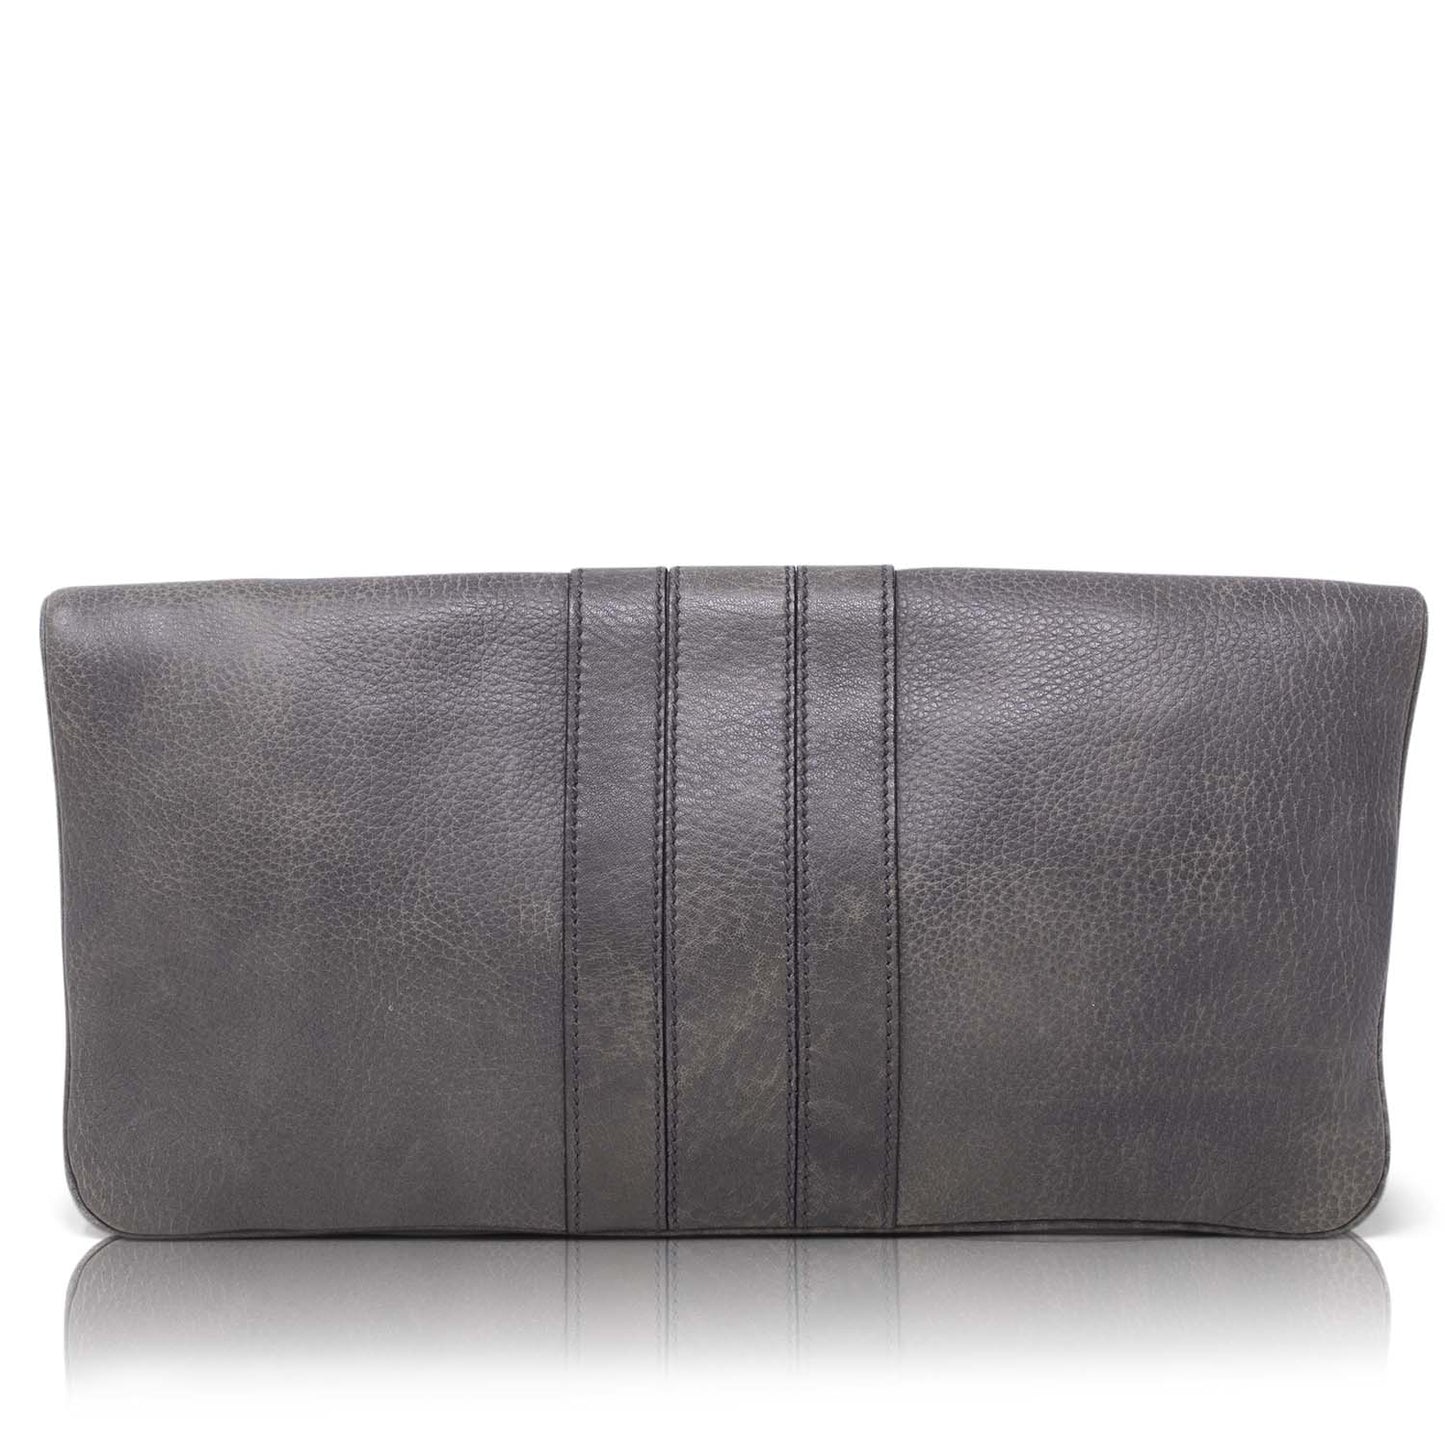 Gucci Lucy Bamboo Gray Clutch